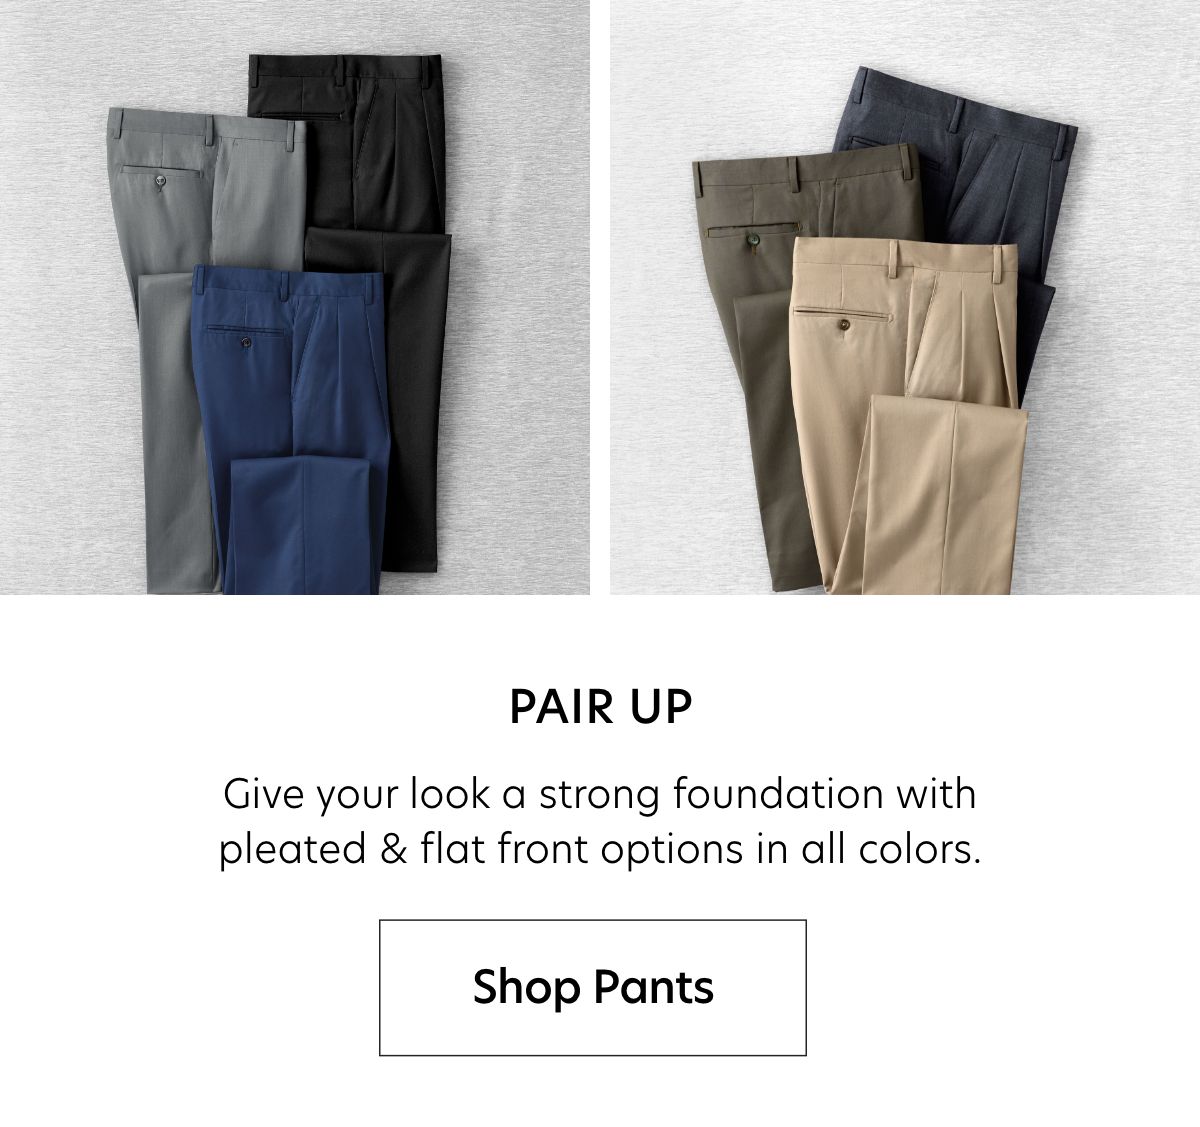  PAIR UP Give your look a strong foundation with pleated flat front options in all colors. Shop Pants 